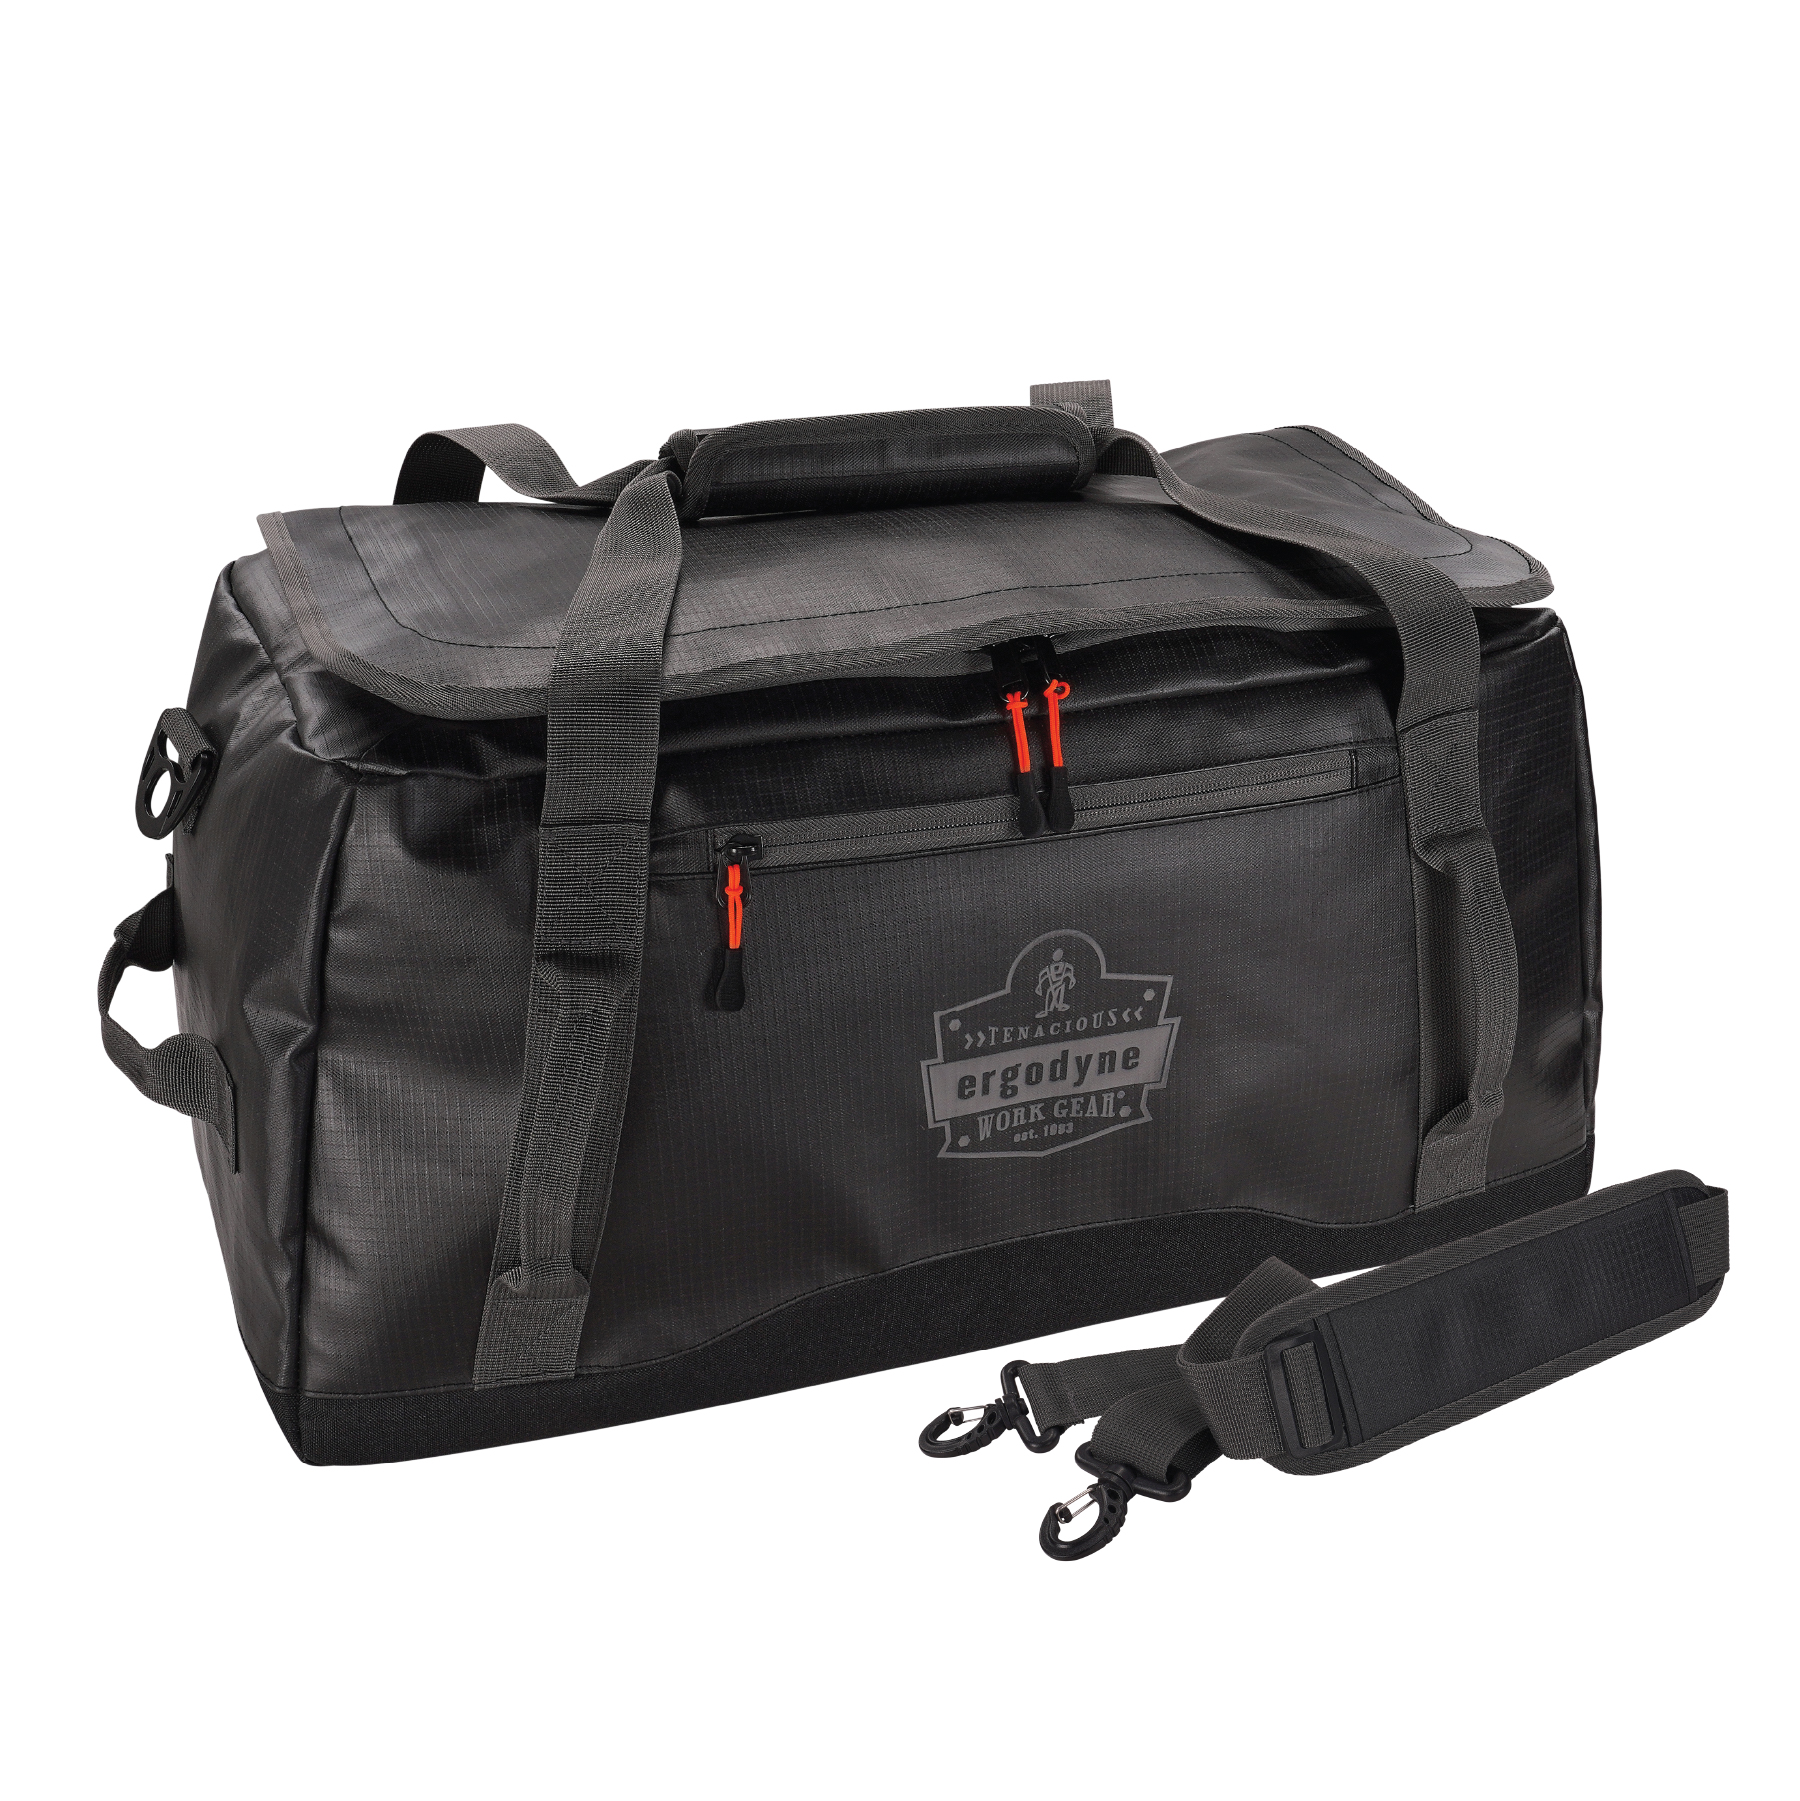 Arsenal 5031 Water-Resistant Duffel Bag from Columbia Safety